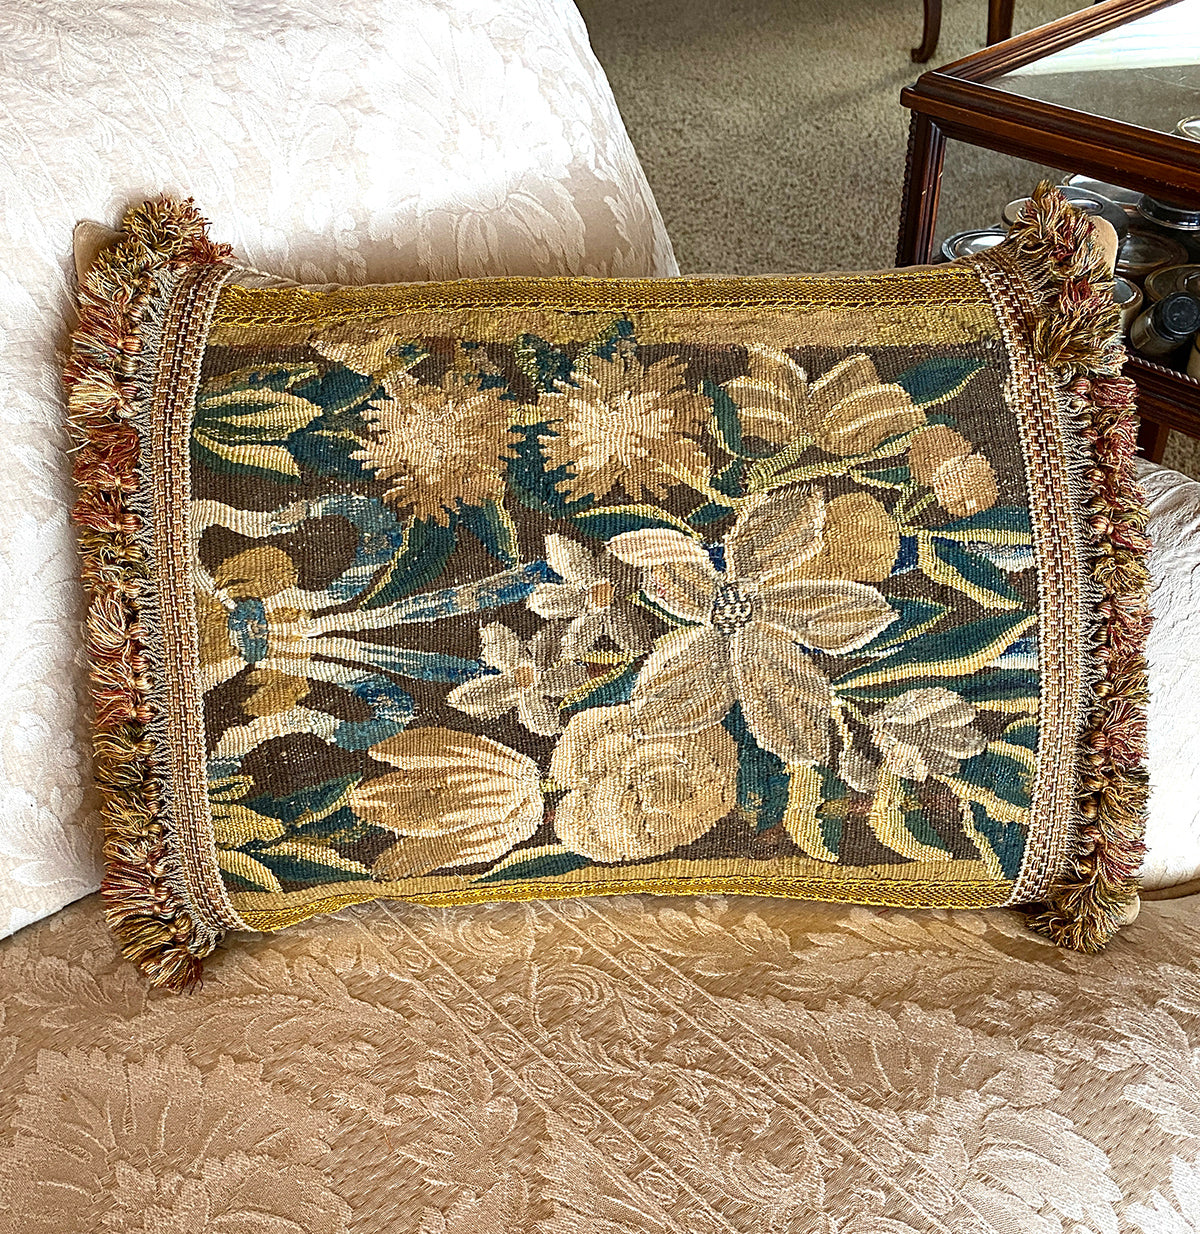 Antique 18th Century French or Flemish Verdure Tapestry Fragment Made into Elegant Throw Pillow, Fringe